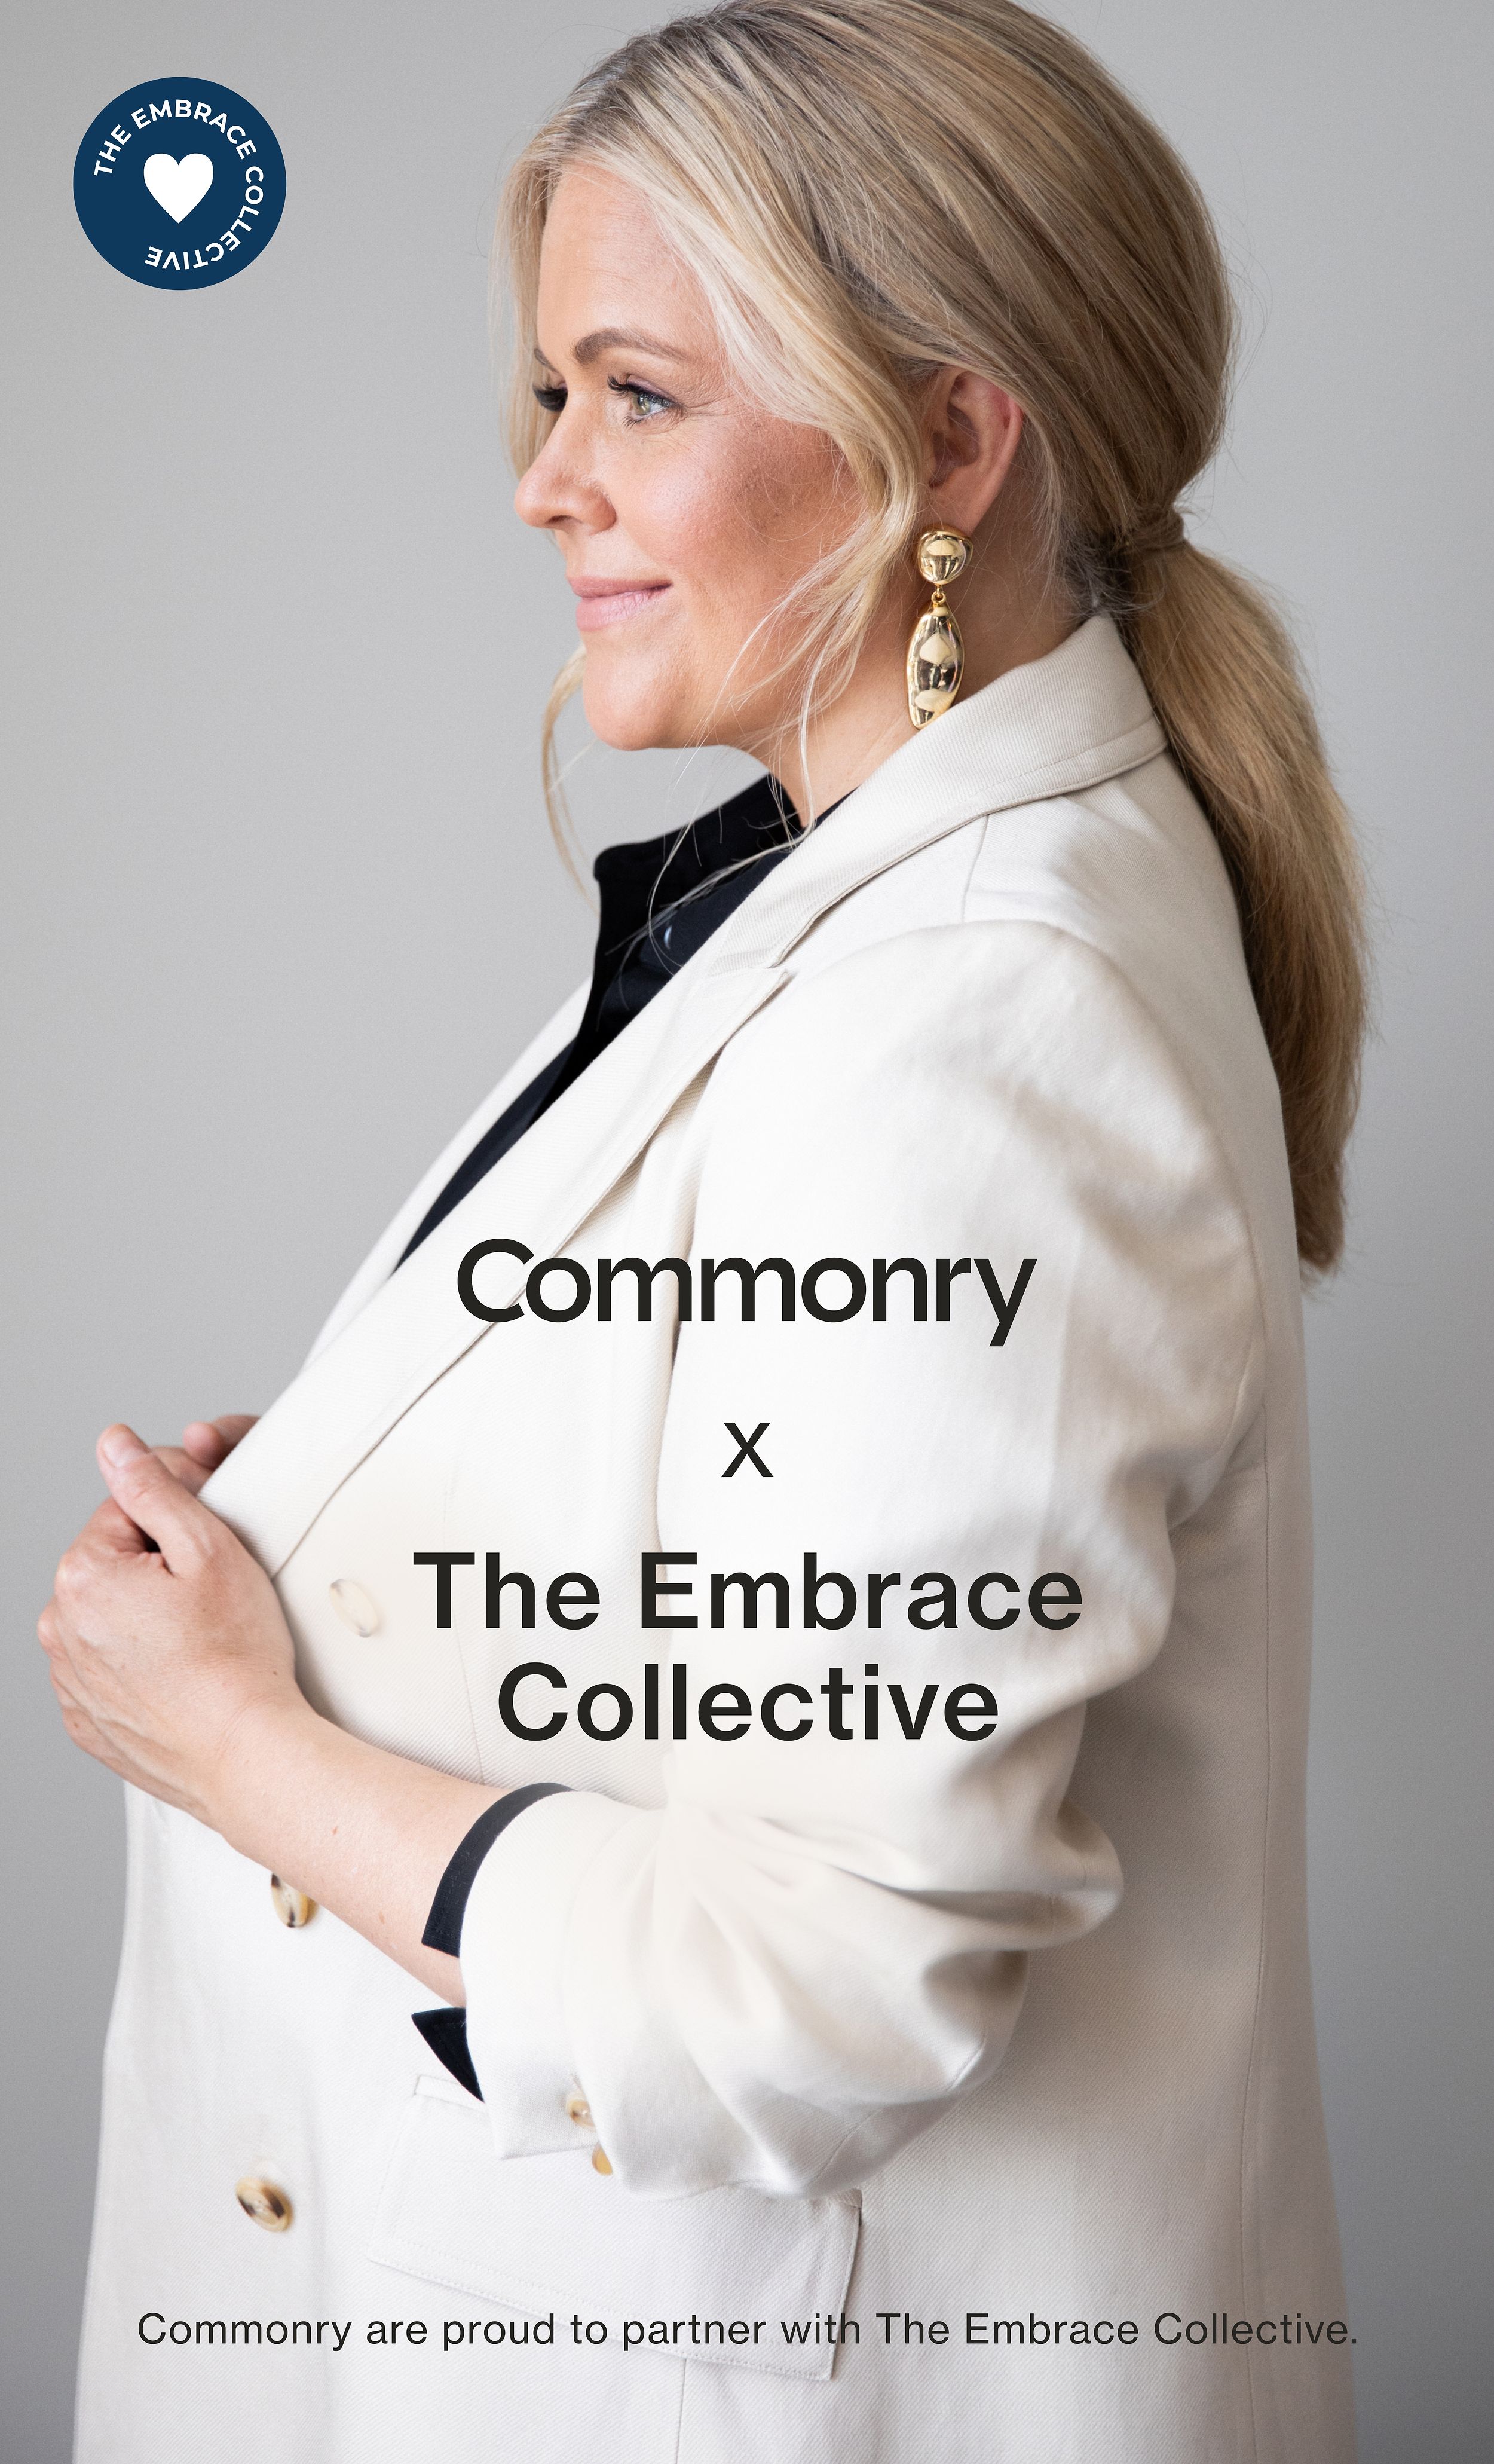 Commonry x The Embrace Collective